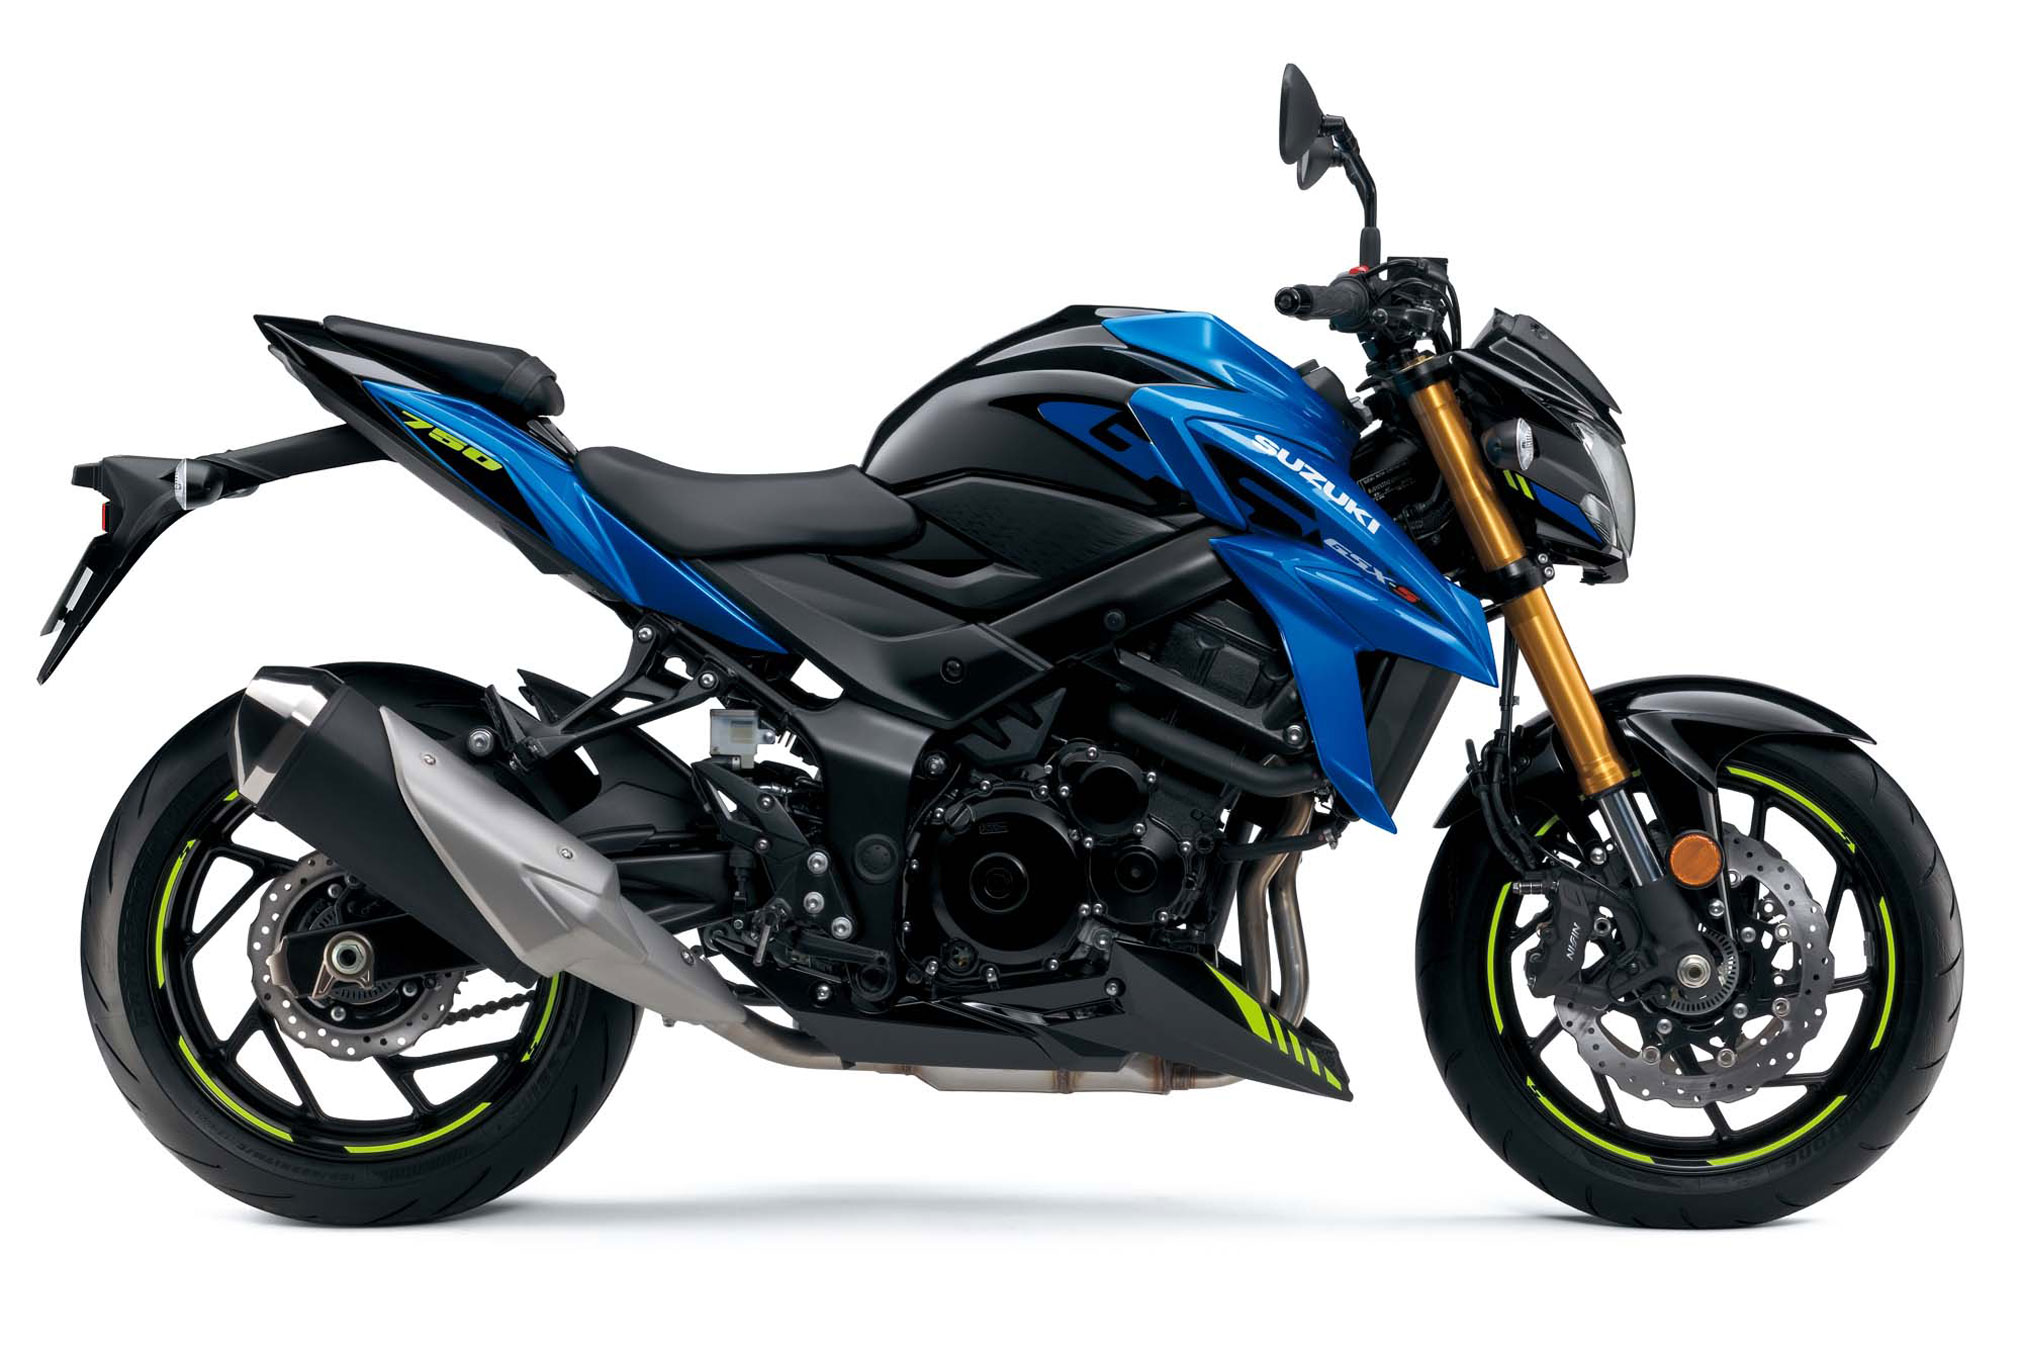 2022 Suzuki GSX-S750 ABS Guide • Total Motorcycle